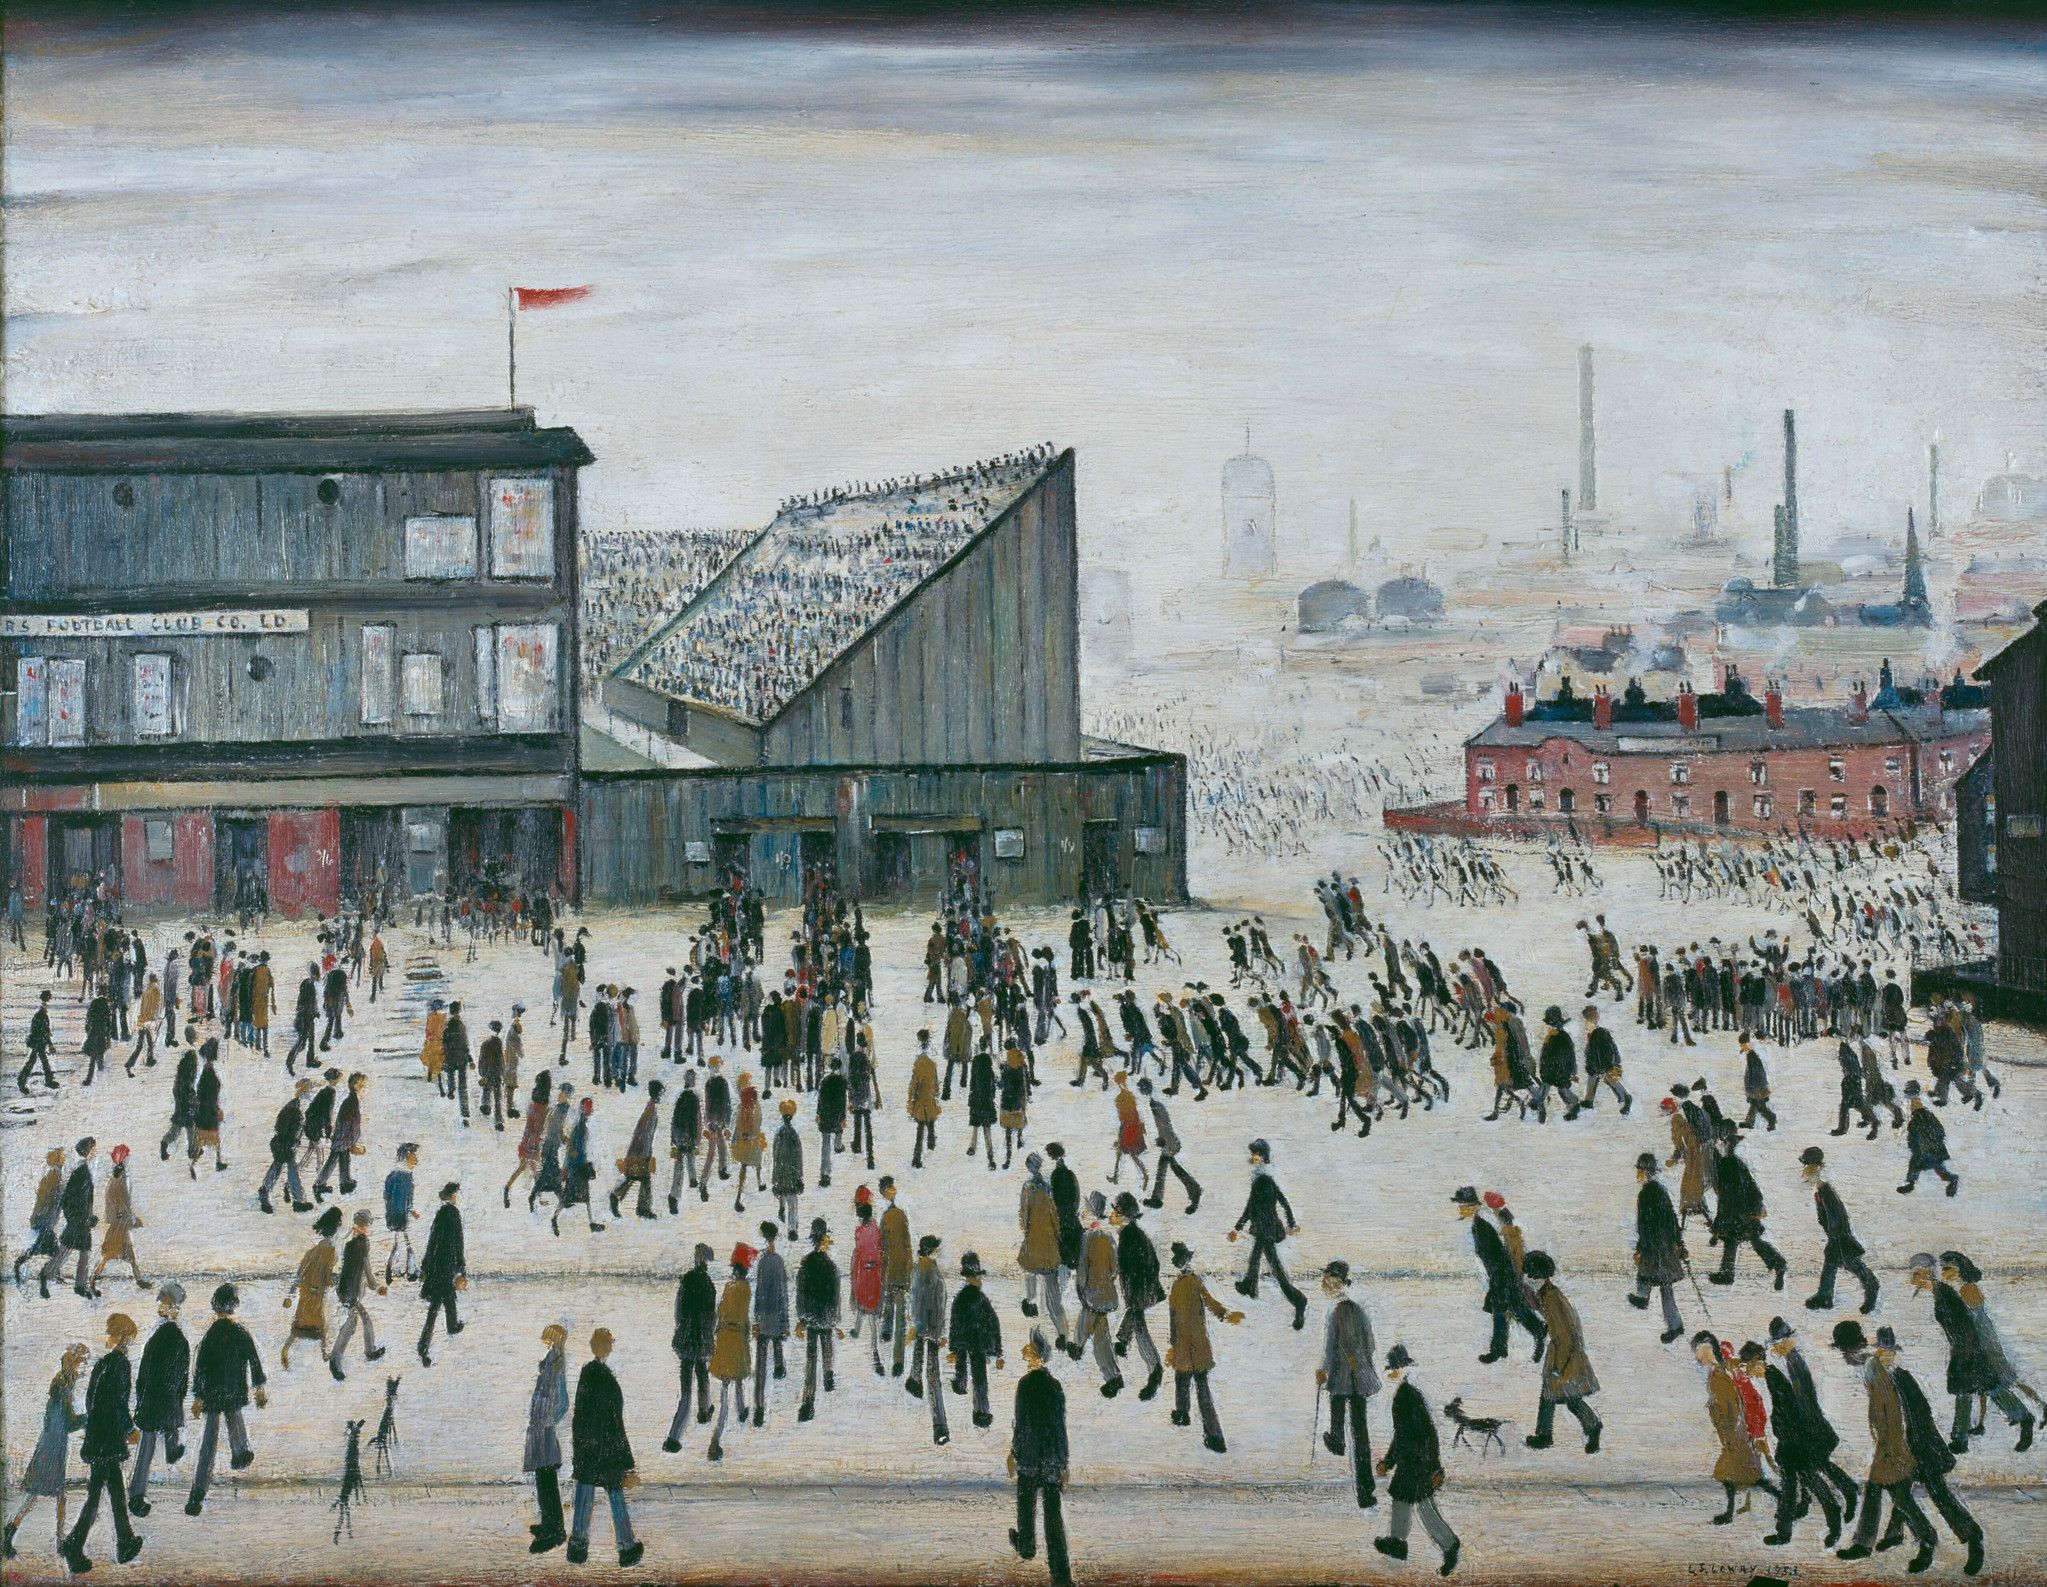 ‘Going to the Match’ by L.S. Lowry.